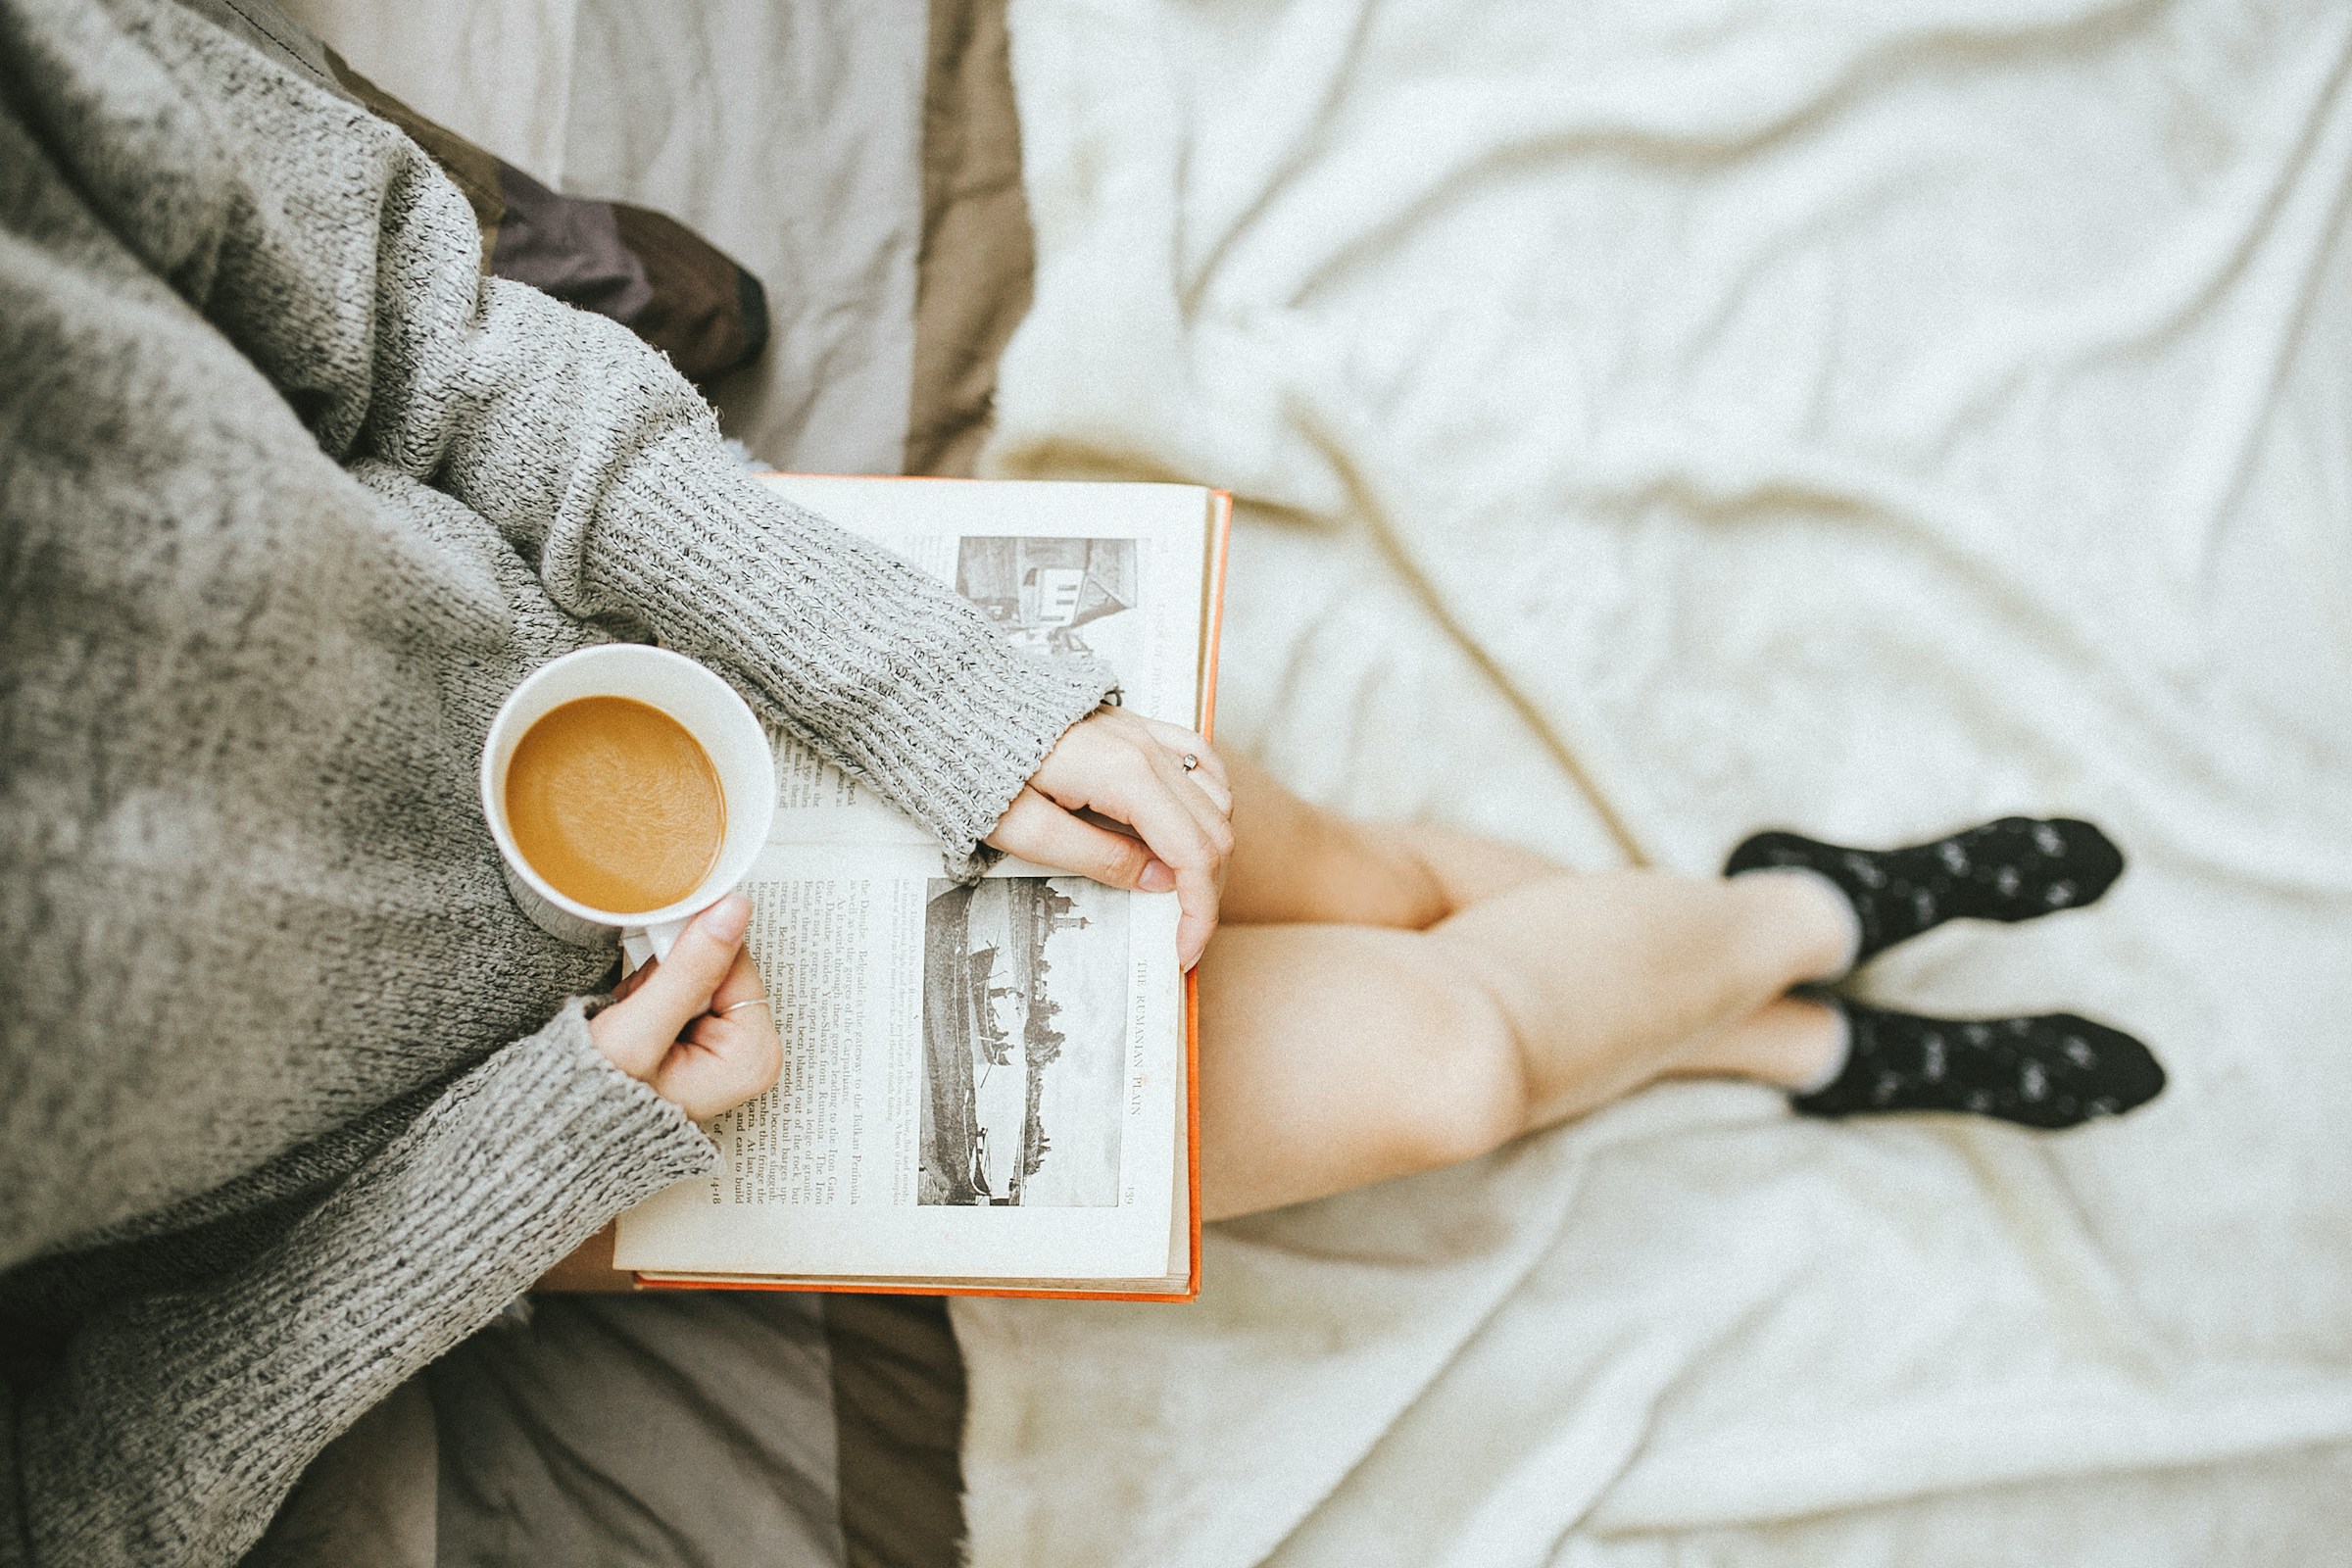 A woman reading a book while enjoying a cup of coffee at home | Source: Unsplash